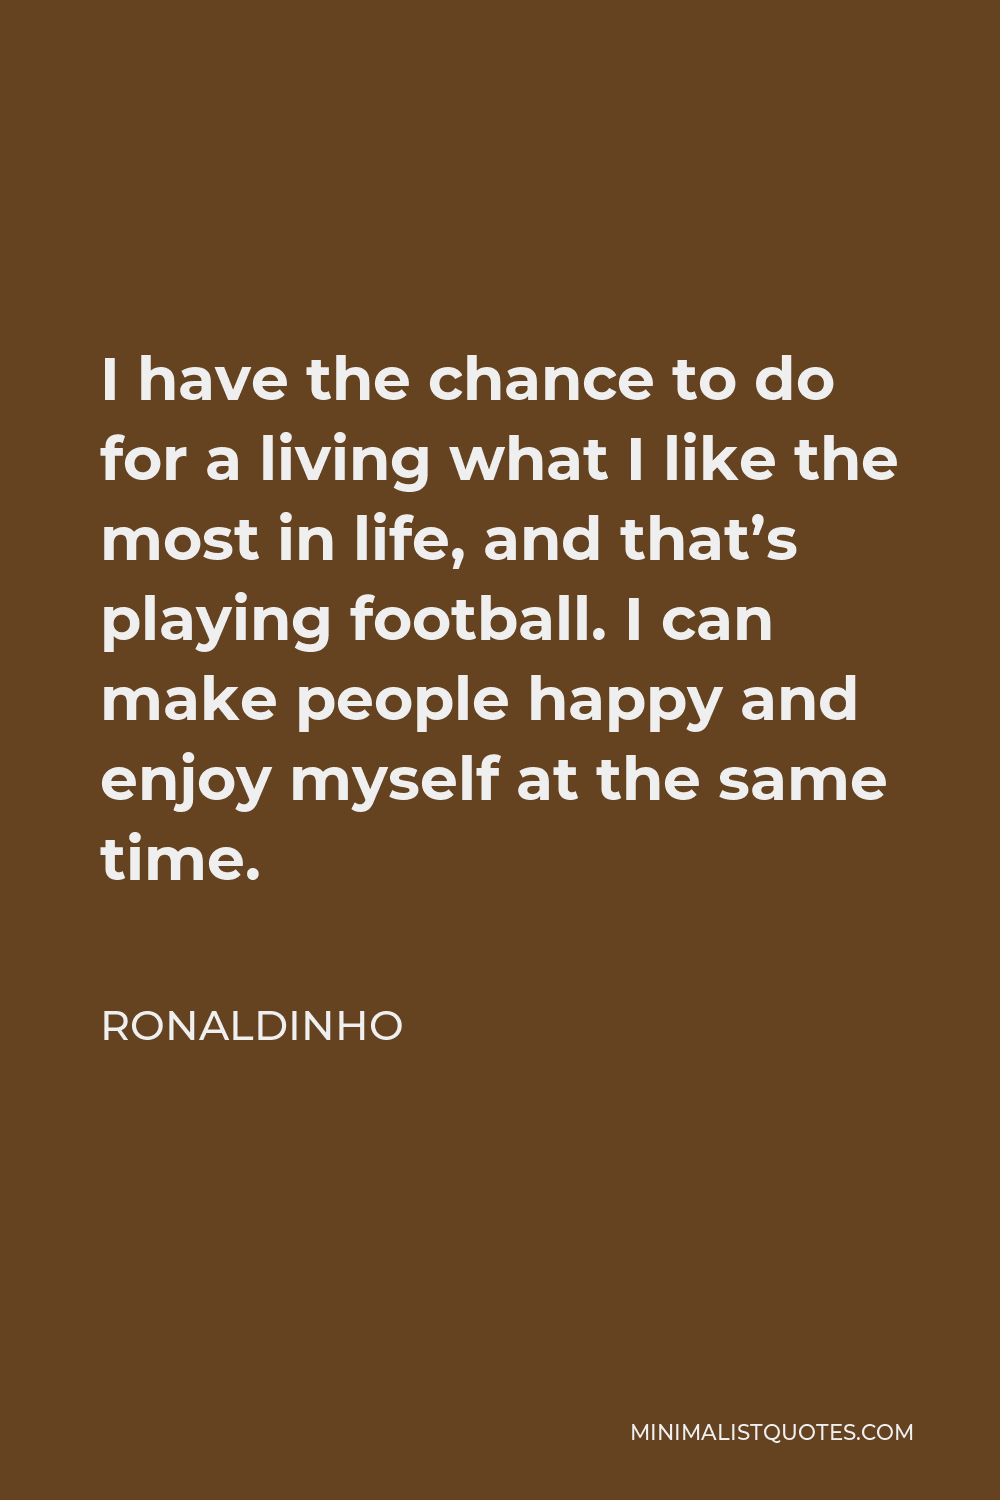 Ronaldinho Quote - I have the chance to do for a living what I like the most in life, and that’s playing football. I can make people happy and enjoy myself at the same time.